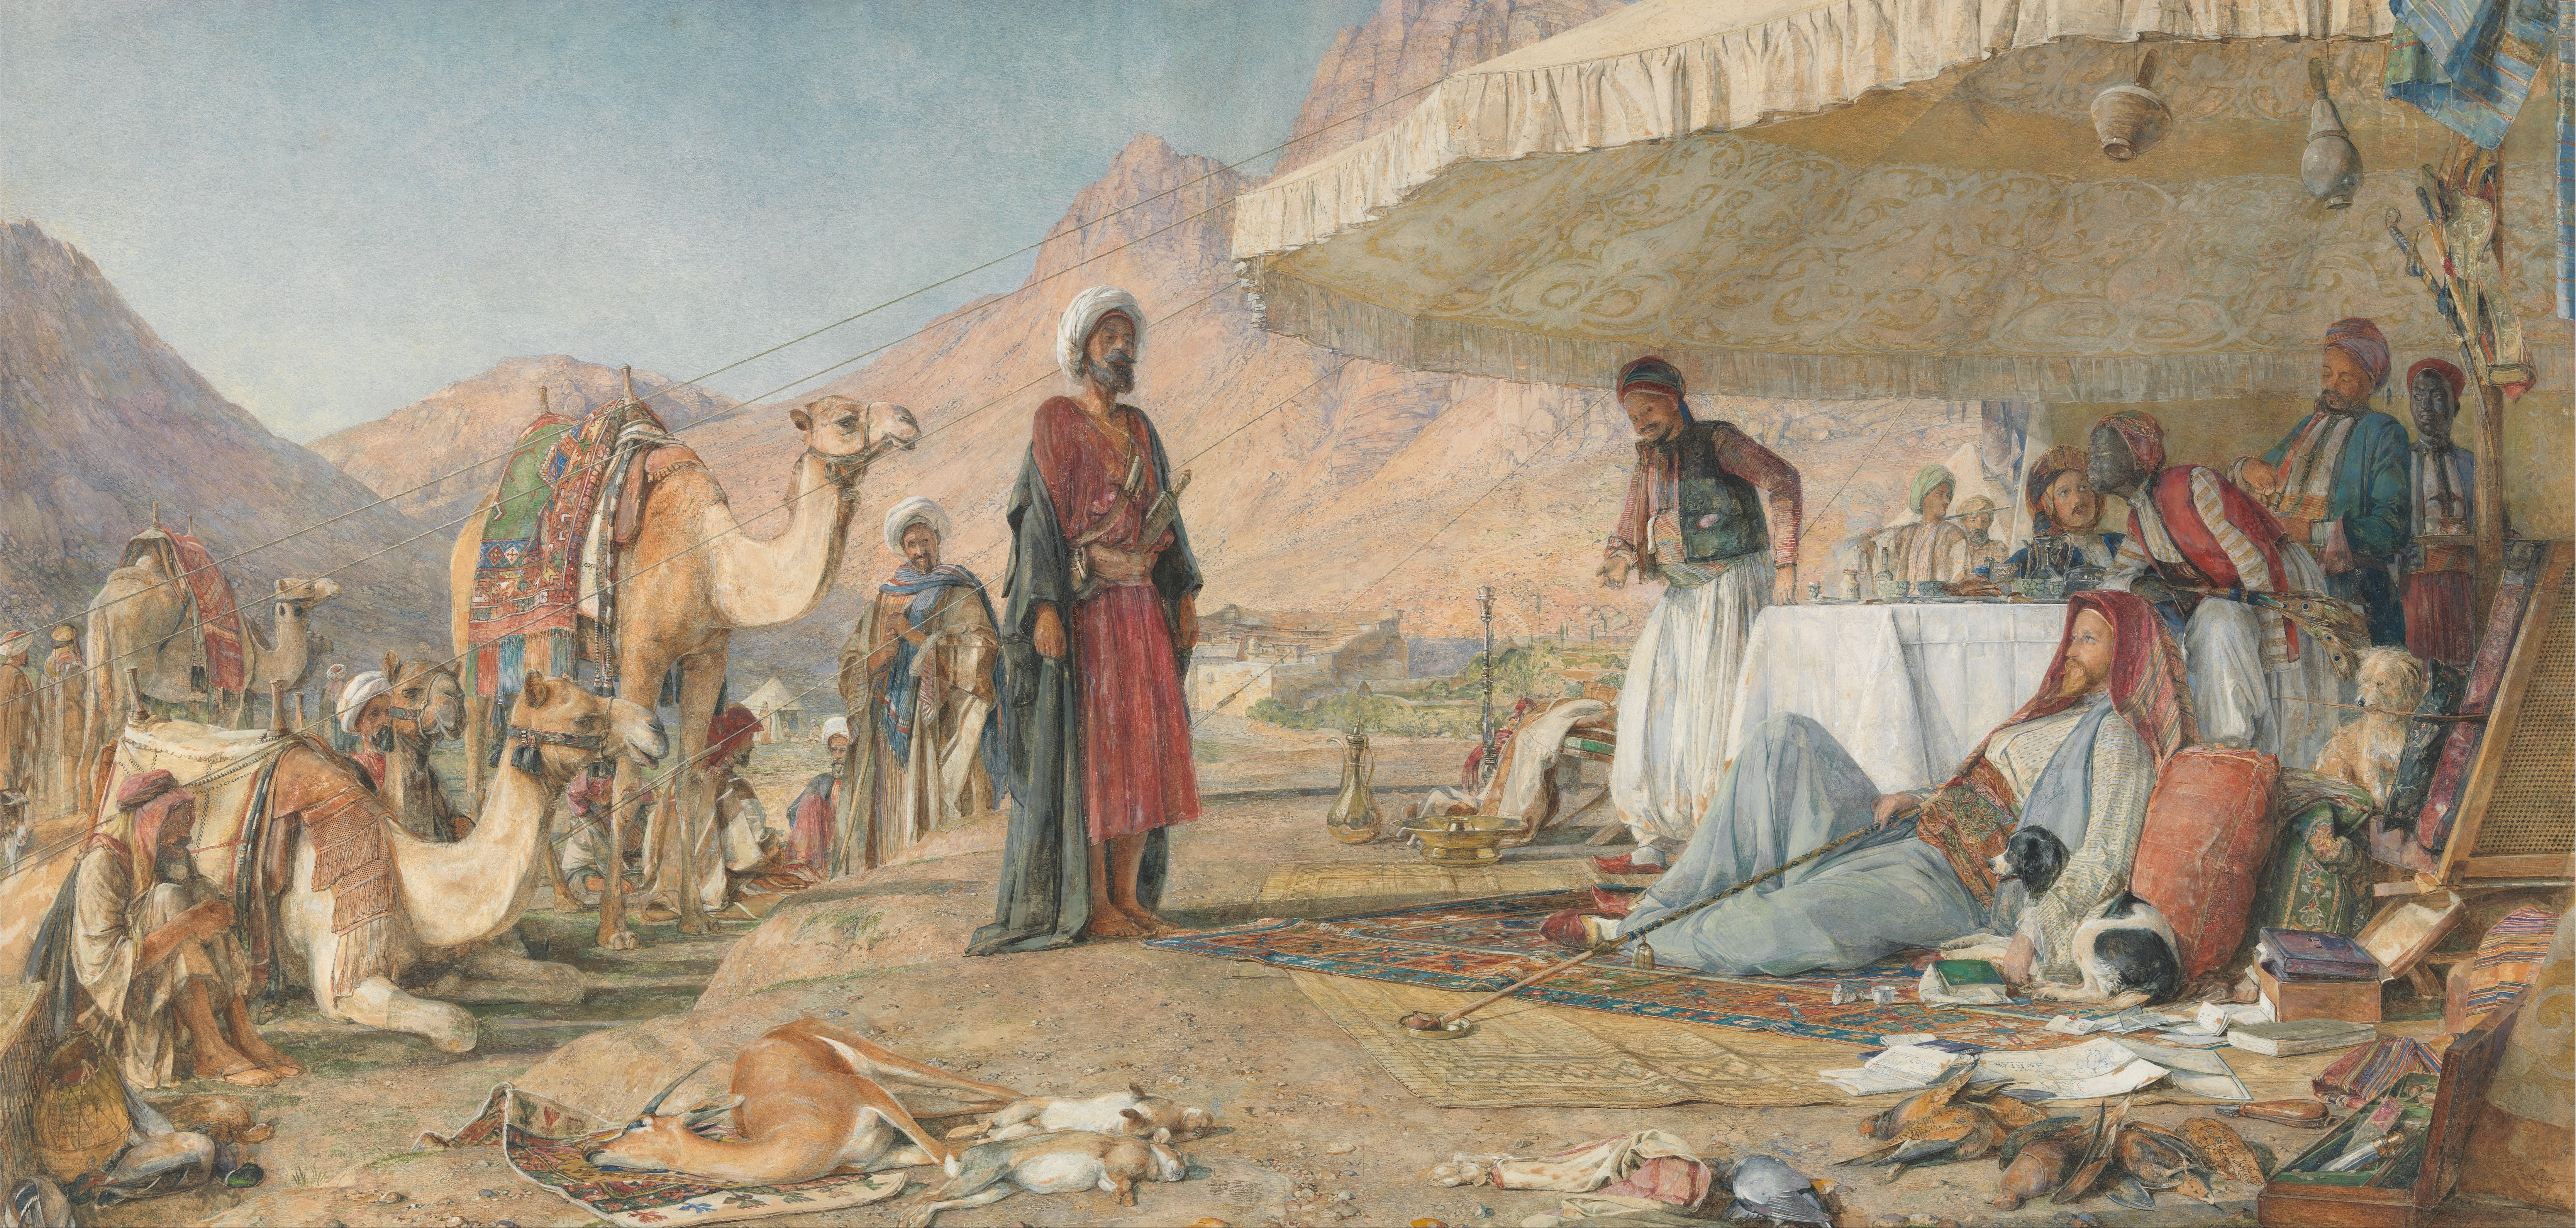 John_Frederick_Lewis_-_A_Frank_Encampment_in_the_Desert_of_Mount_Sinai._1842_-_The_Convent_of_St._Catherine_in_the_Distance_-_Google_Art_Project.jpg